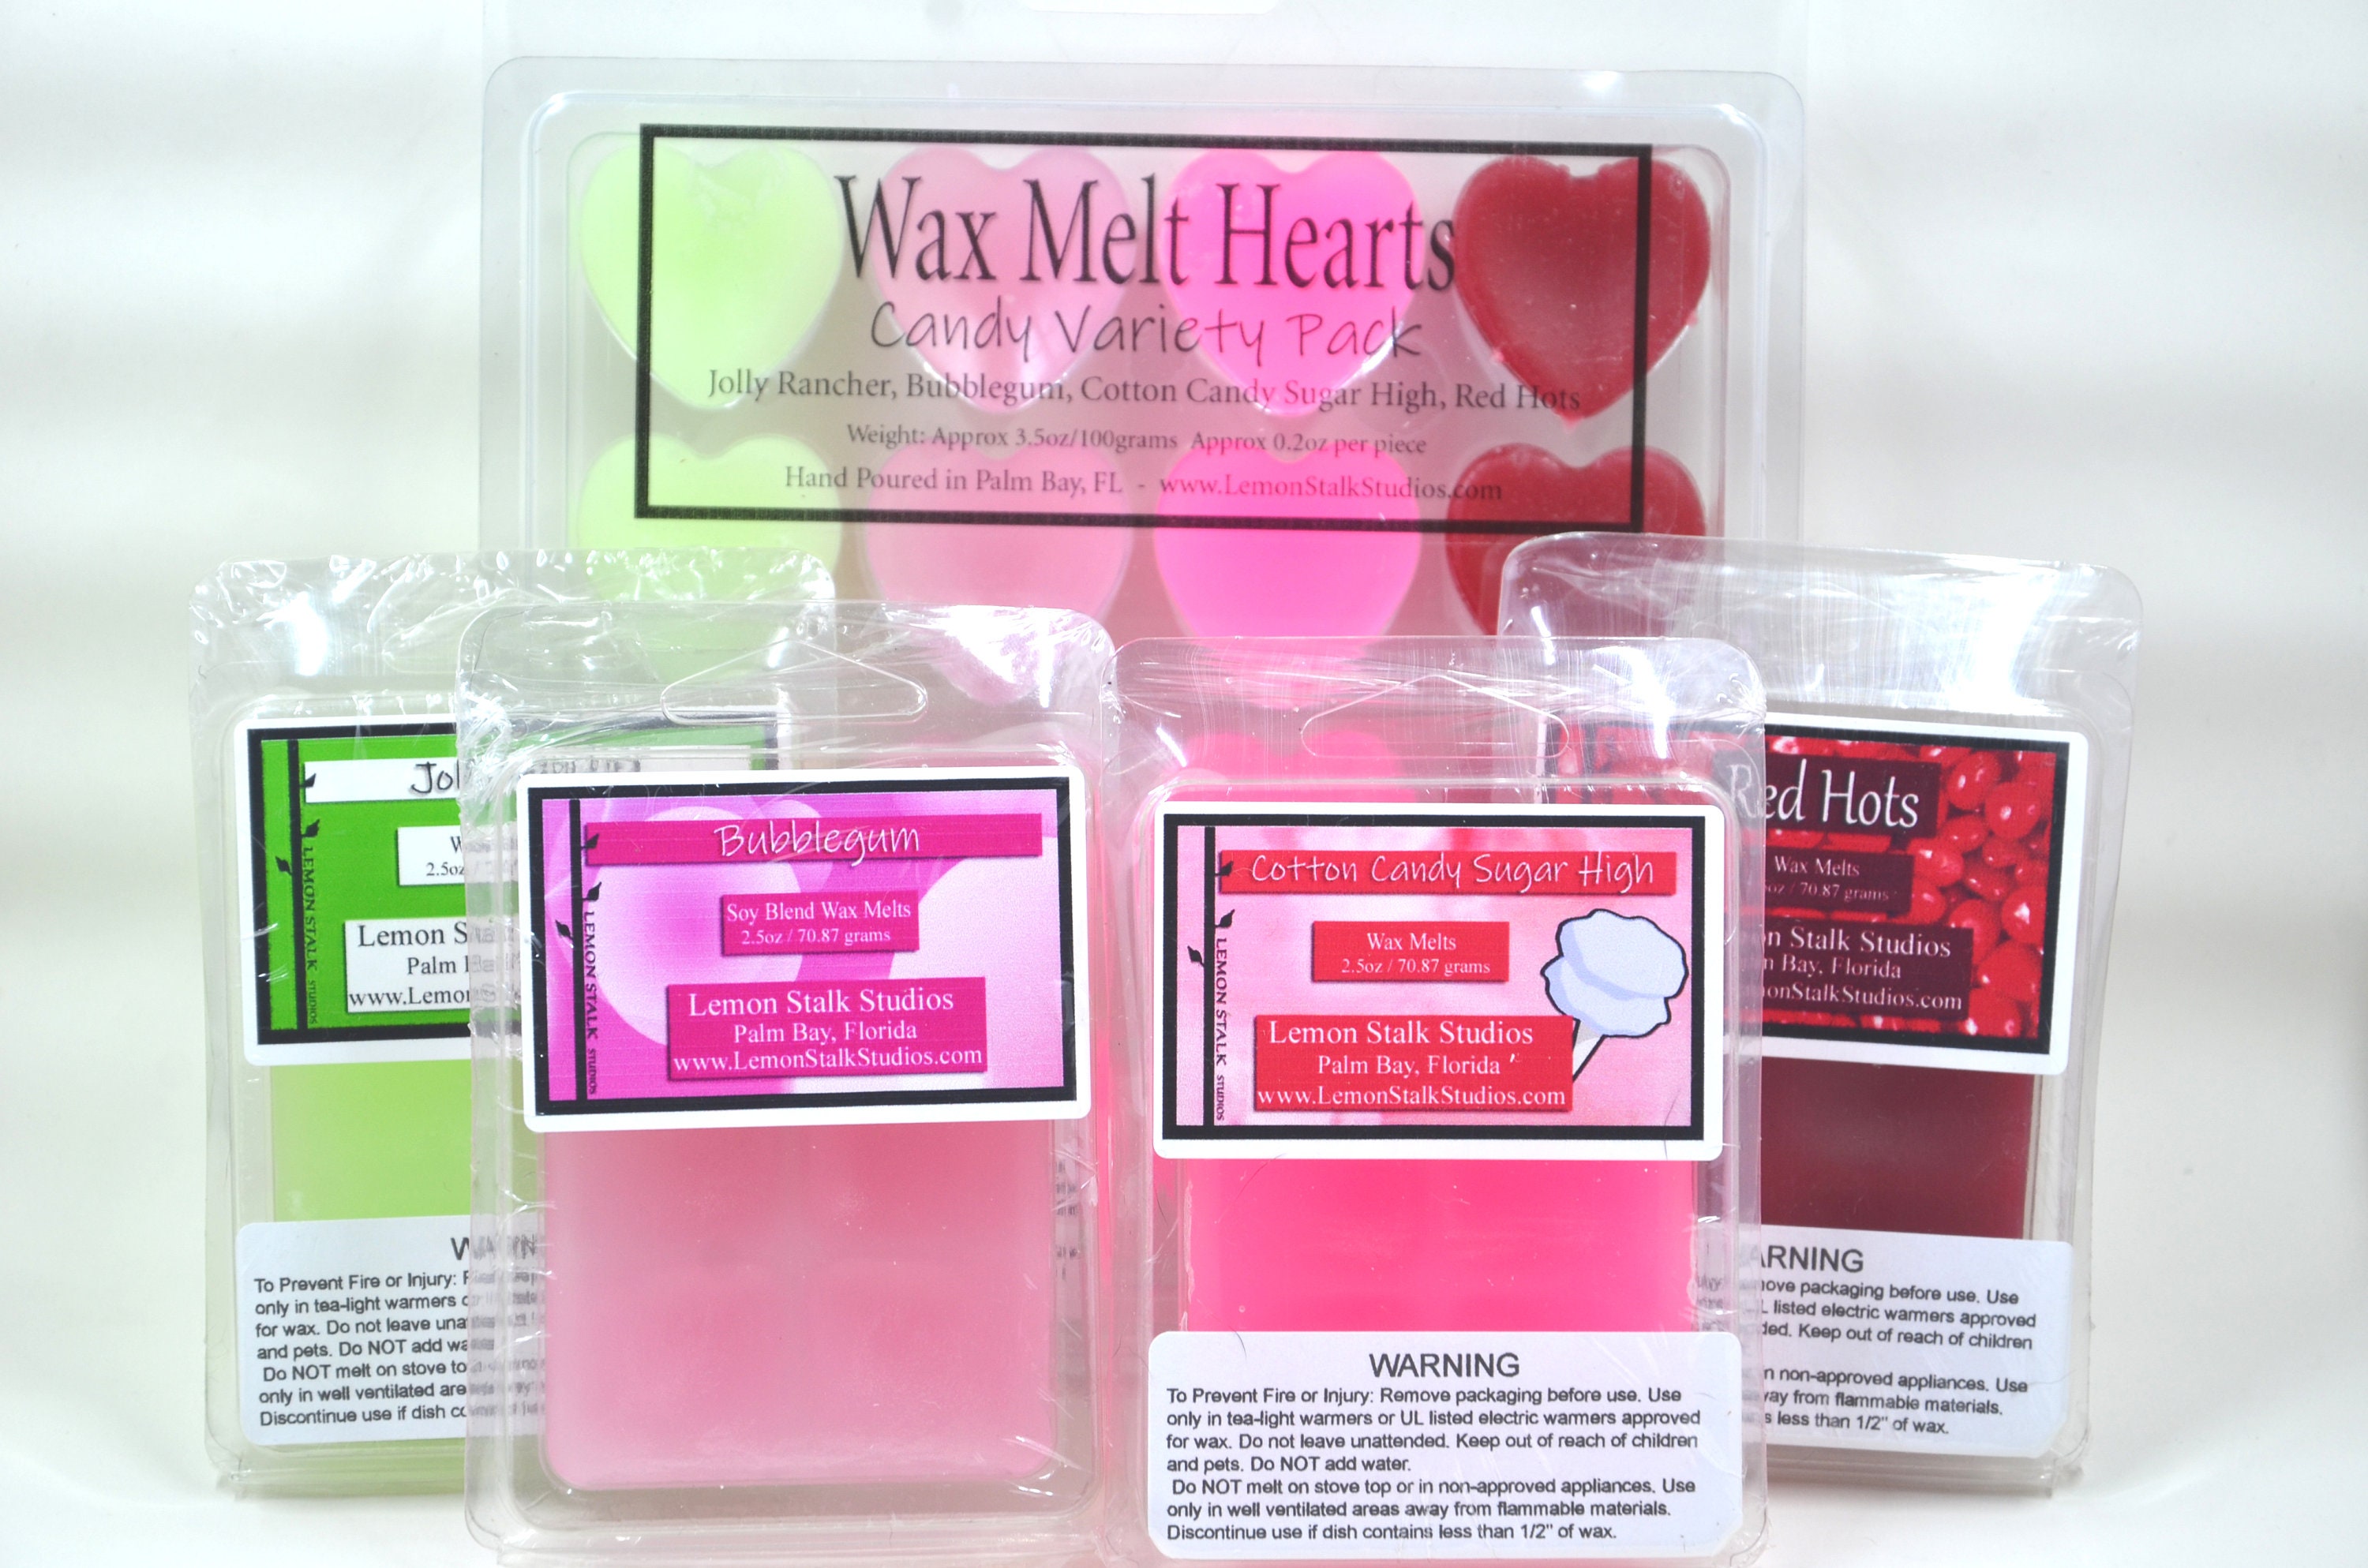 Candle Warmers Soy Wax Melts, Pink Cotton Candy - 2.5 oz